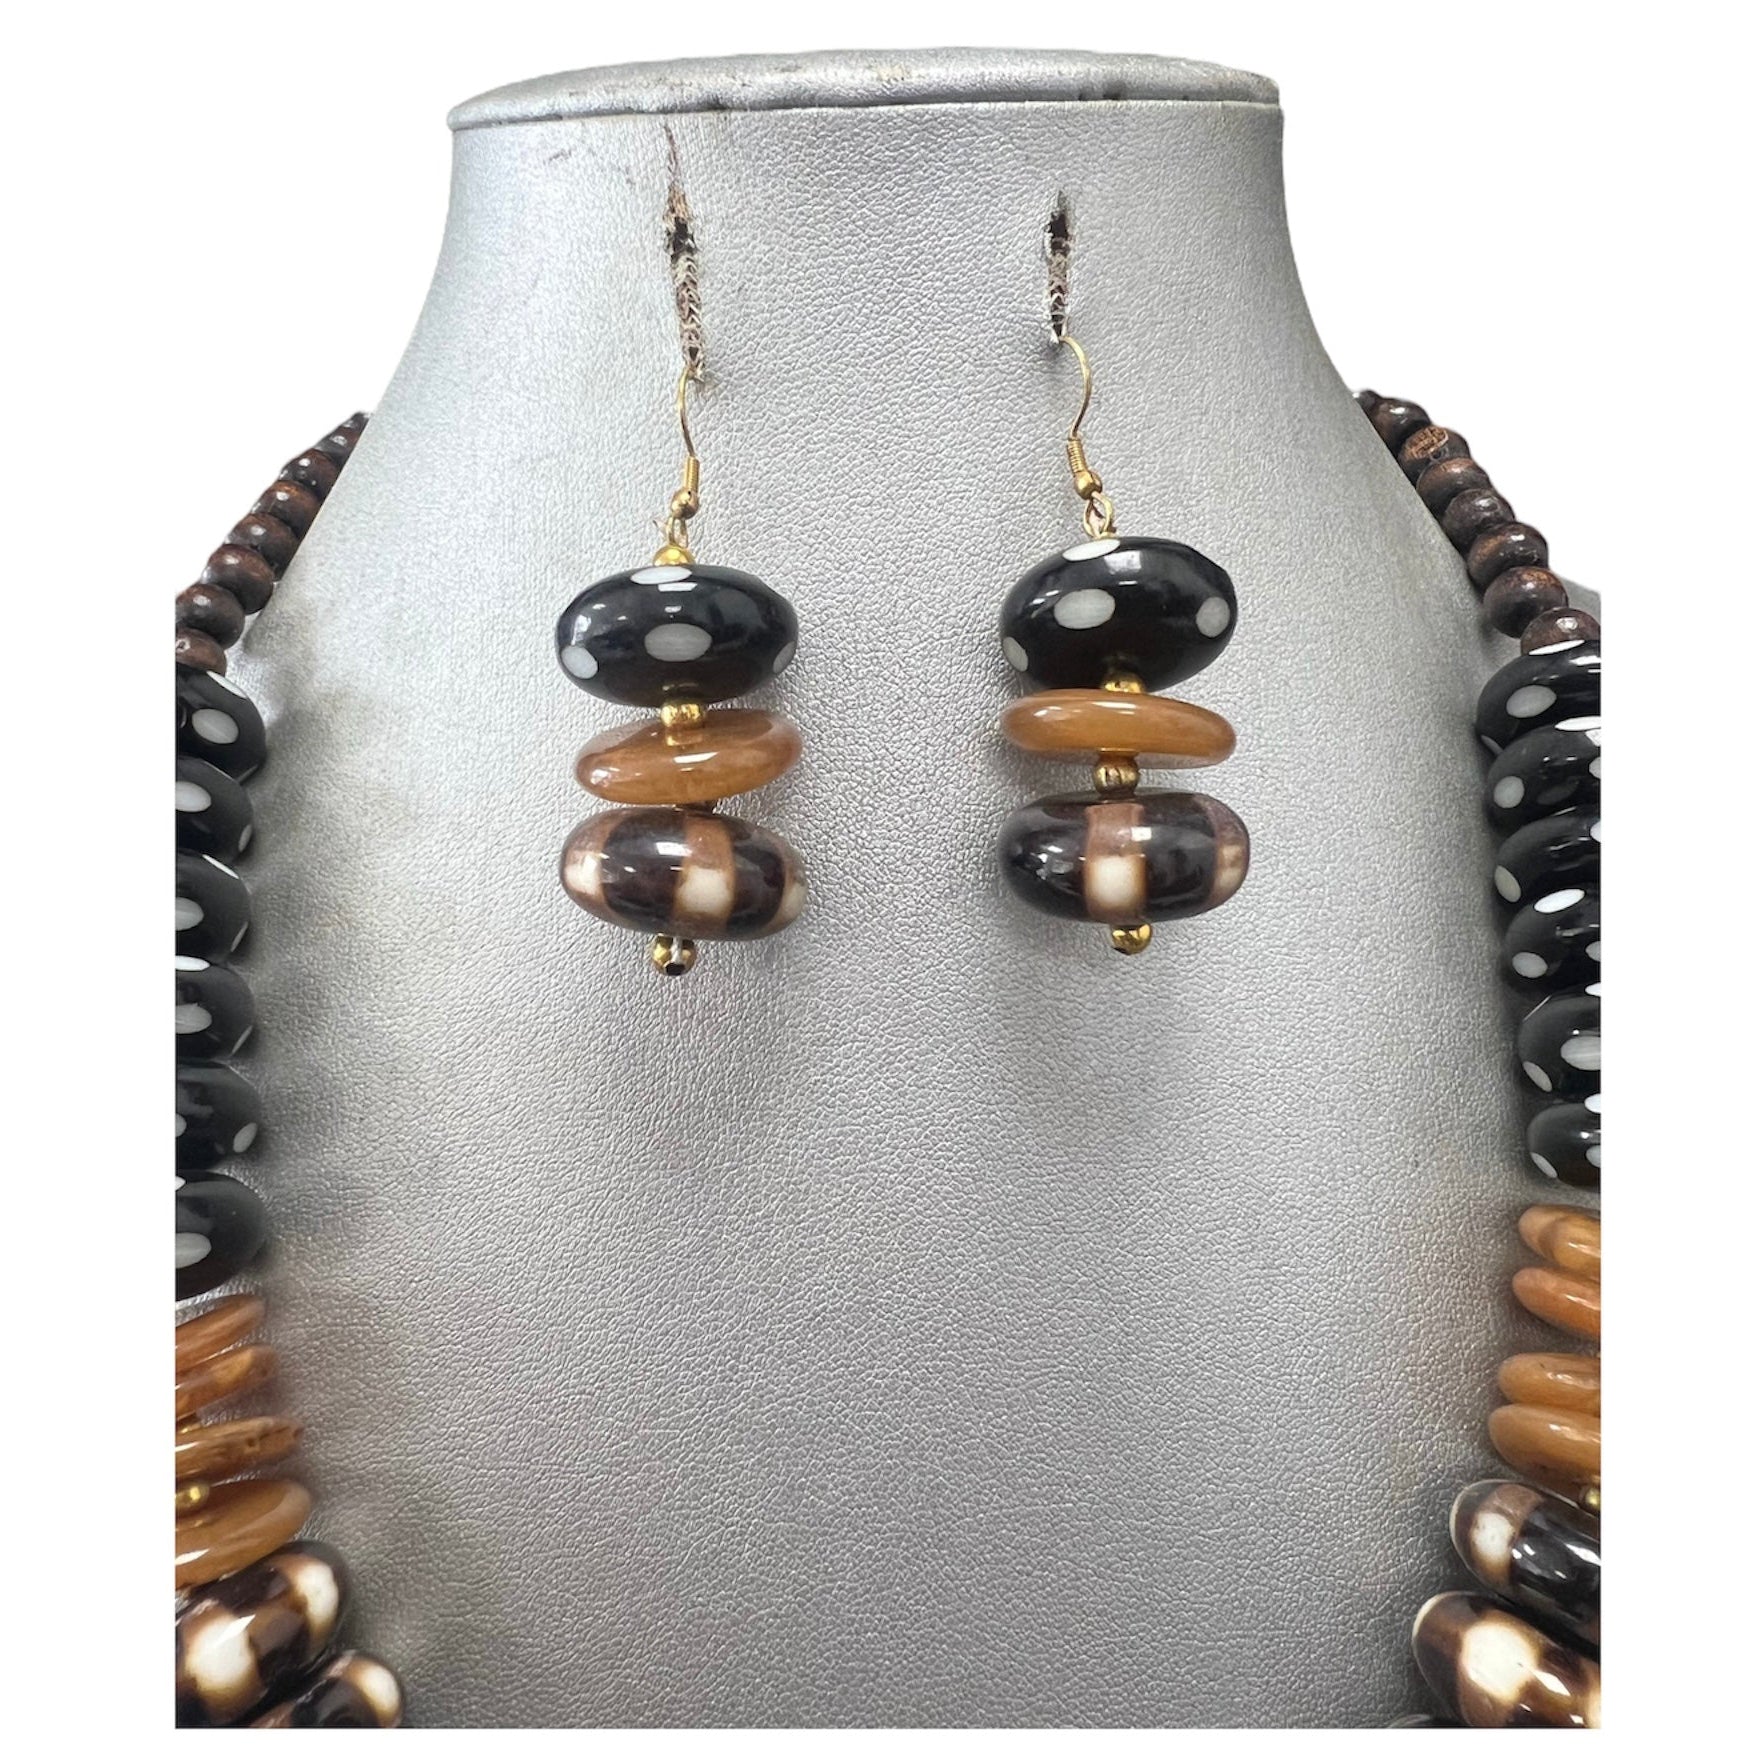 Women's African Wooden Beaded Necklace Set -- Jewelry 56